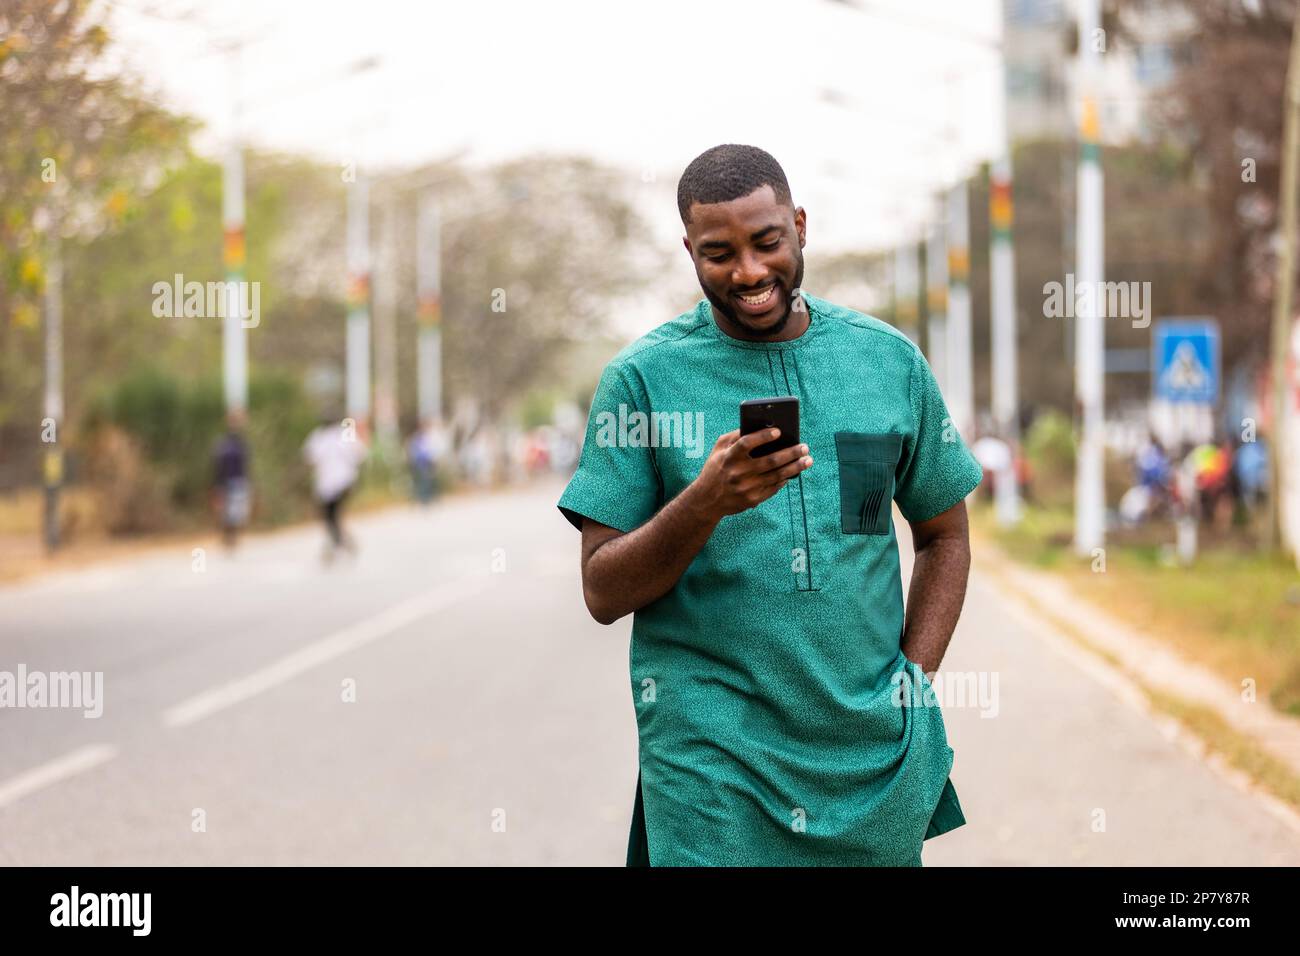 Confident young African man using smartphone outdoors, Tech-savvy individual exploring new apps on phone Stock Photo